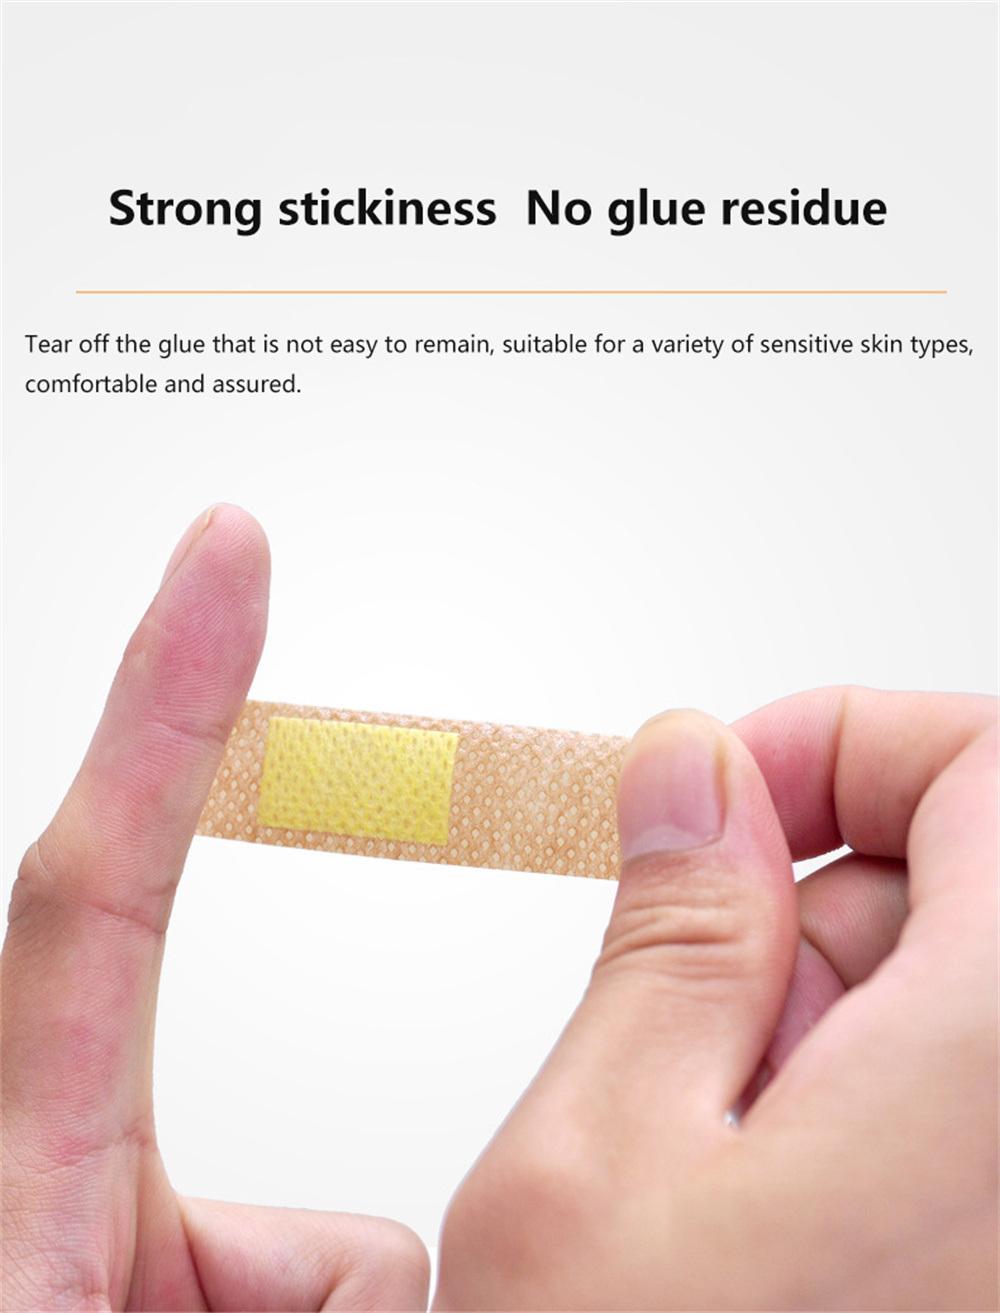 Band-Aid Waterproof Breathable Household Hemostatic Patch Anti-Wear Foot Band-Aid